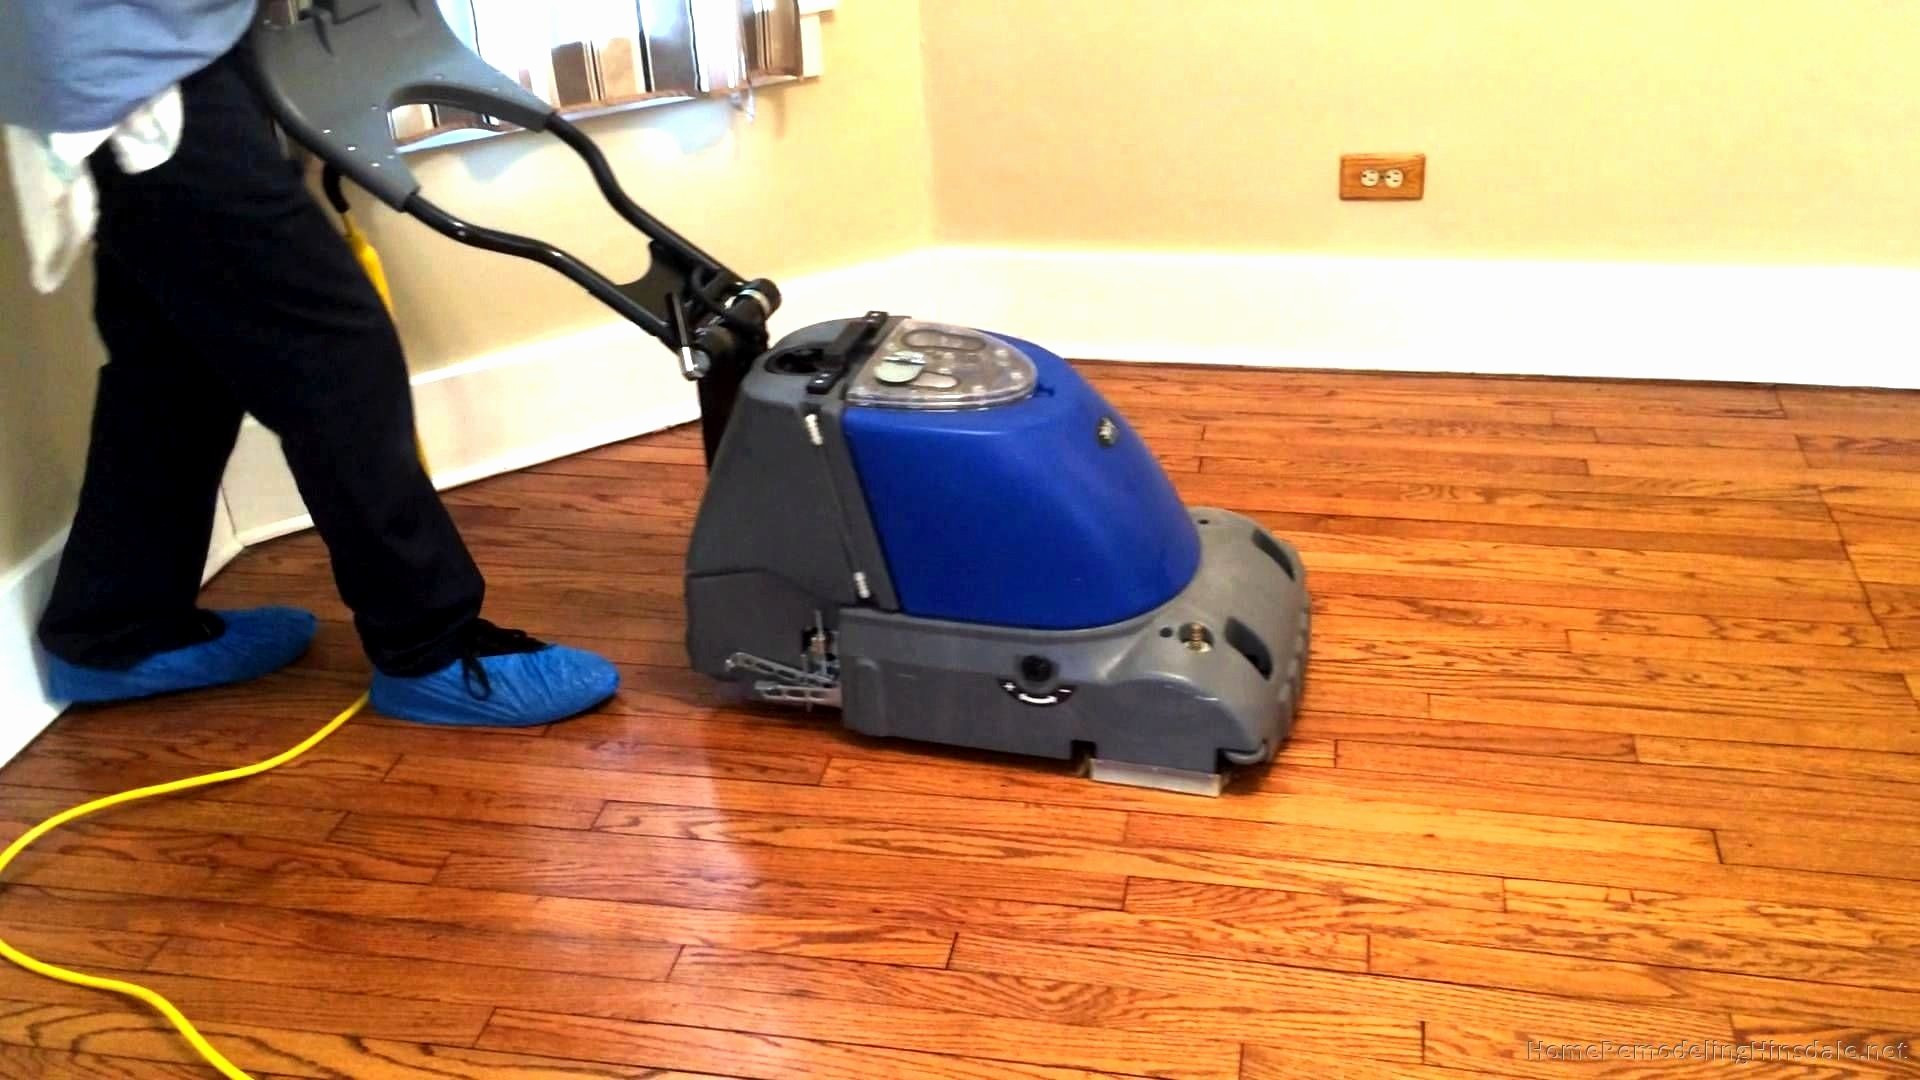 12 Lovable Hardwood Floor Vacuum and Steam Cleaner Reviews 2024 free download hardwood floor vacuum and steam cleaner reviews of 17 unique shark hardwood floor cleaner photograph dizpos com in shark hardwood floor cleaner new 50 lovely bissell tile floor cleaner 50 s 